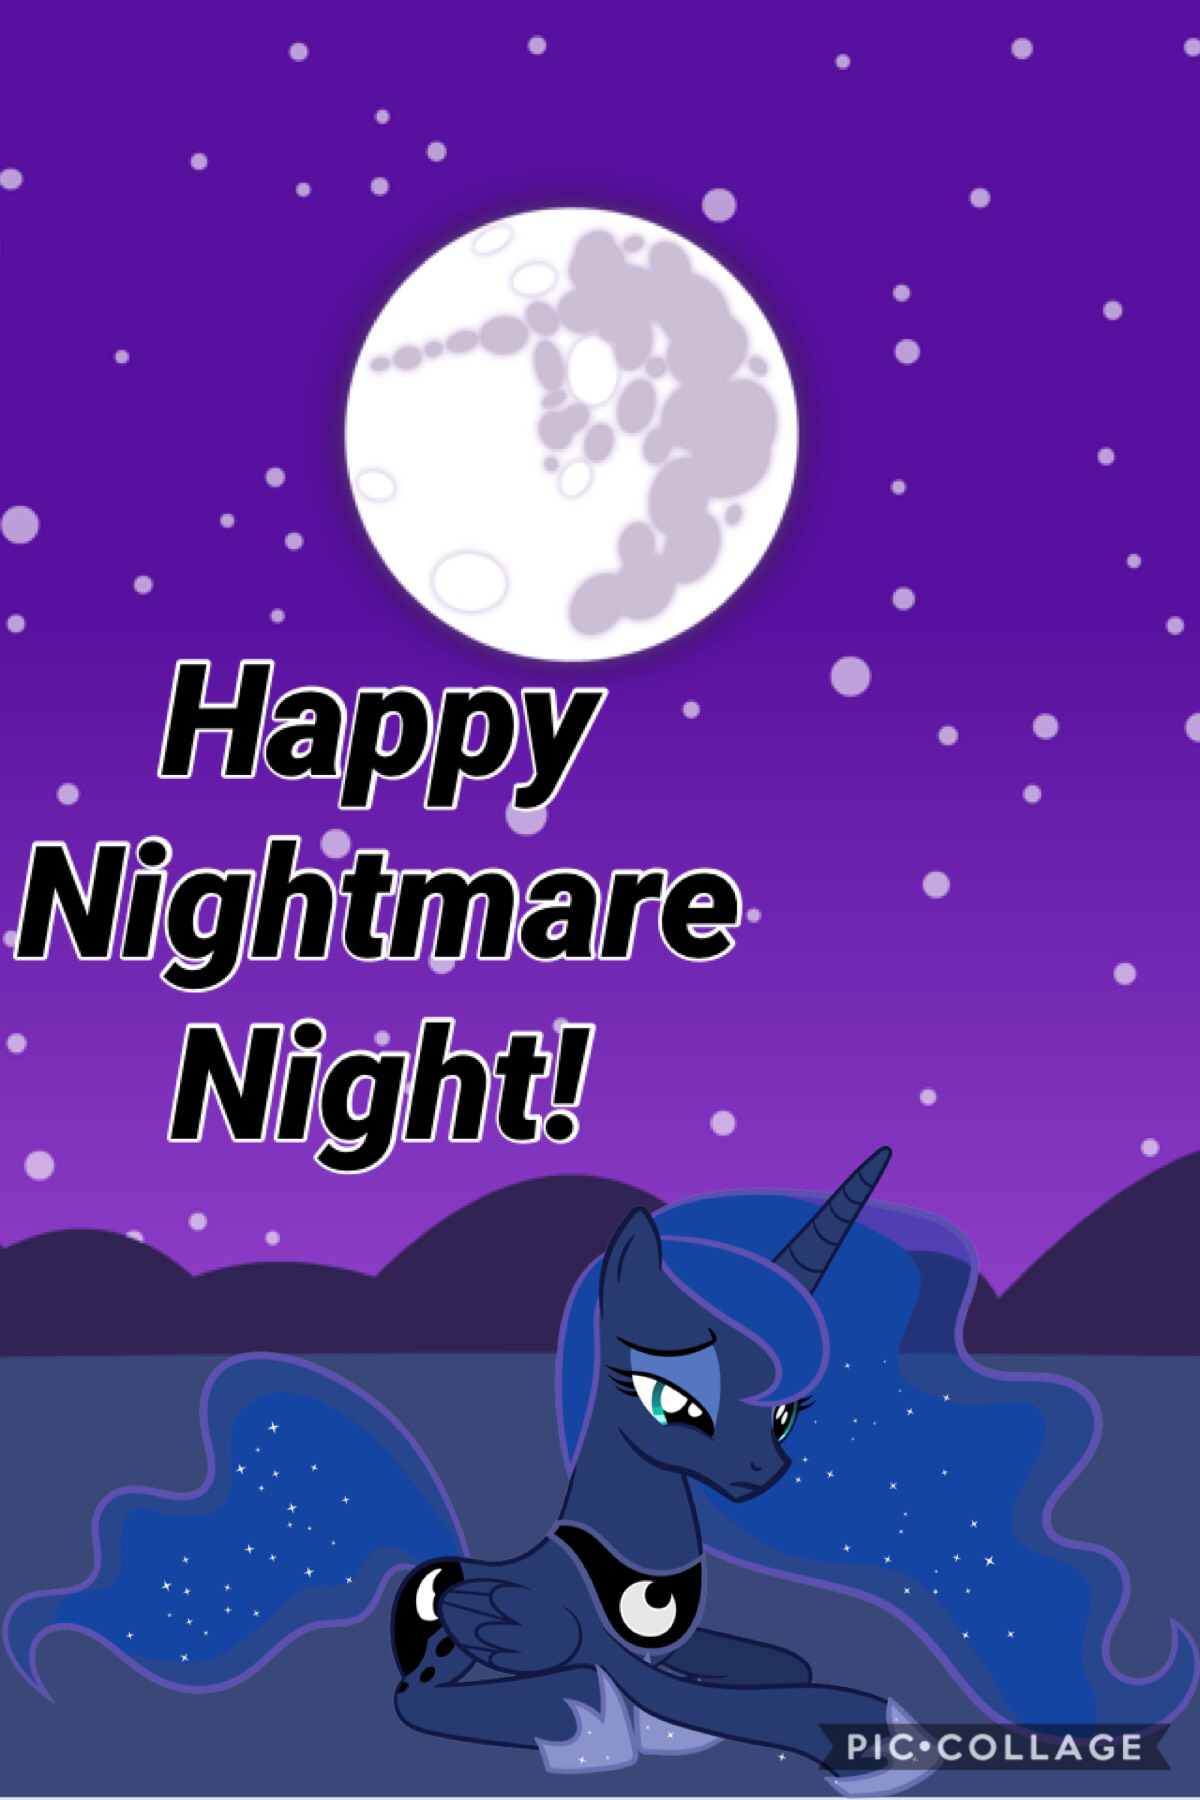 “The night will last fOrever!” She said. “I just want tO shOw everypOny that I’ve changed.” She said. Happy HallOween everypOny!!! 